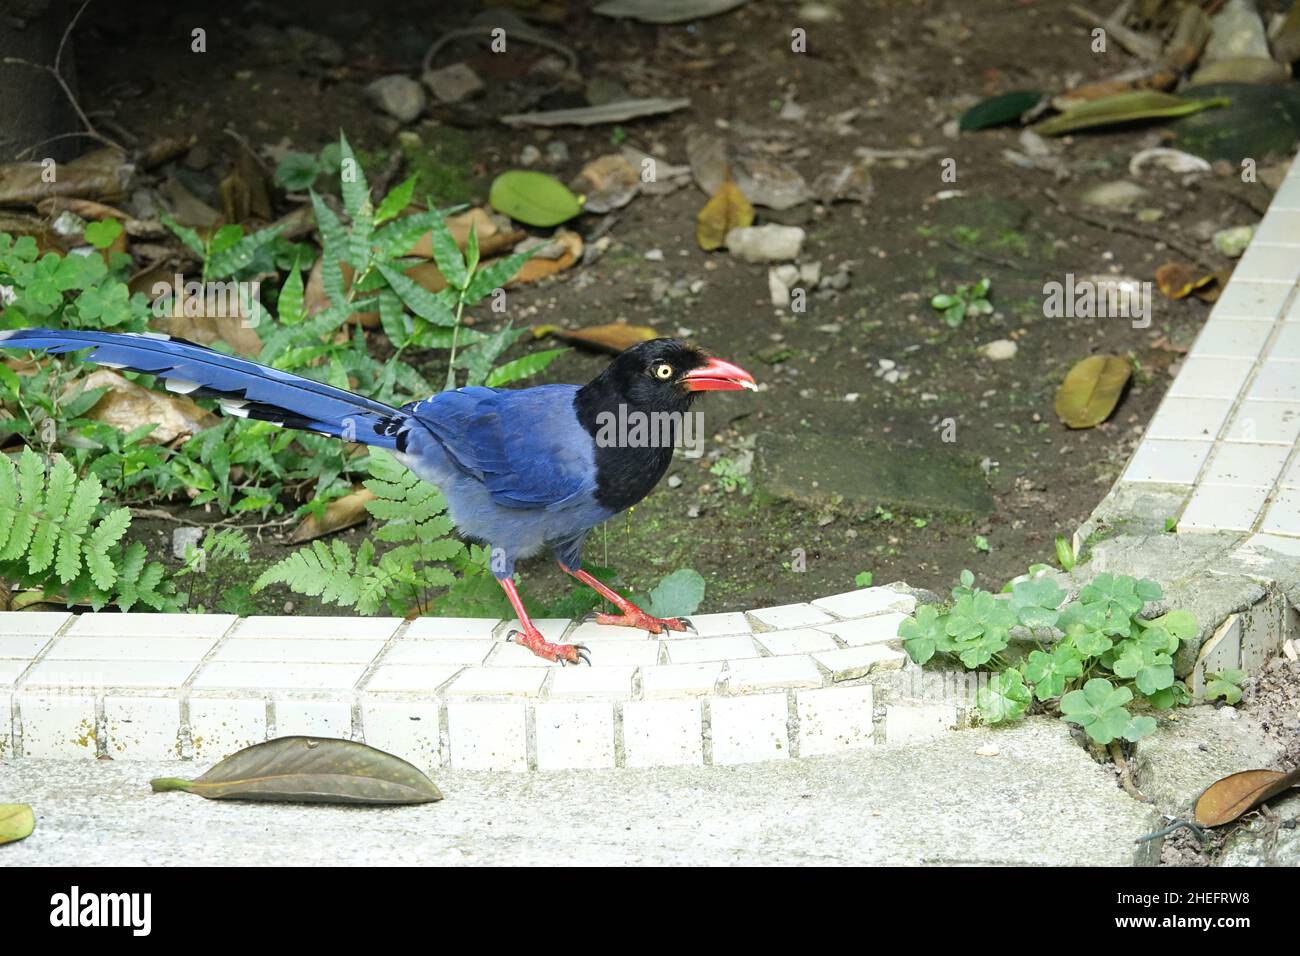 Taiwan blue magpie (臺灣藍鵲), also called the Taiwan magpie or Formosan blue magpie, is an endemic bird species of Taiwan. Stock Photo